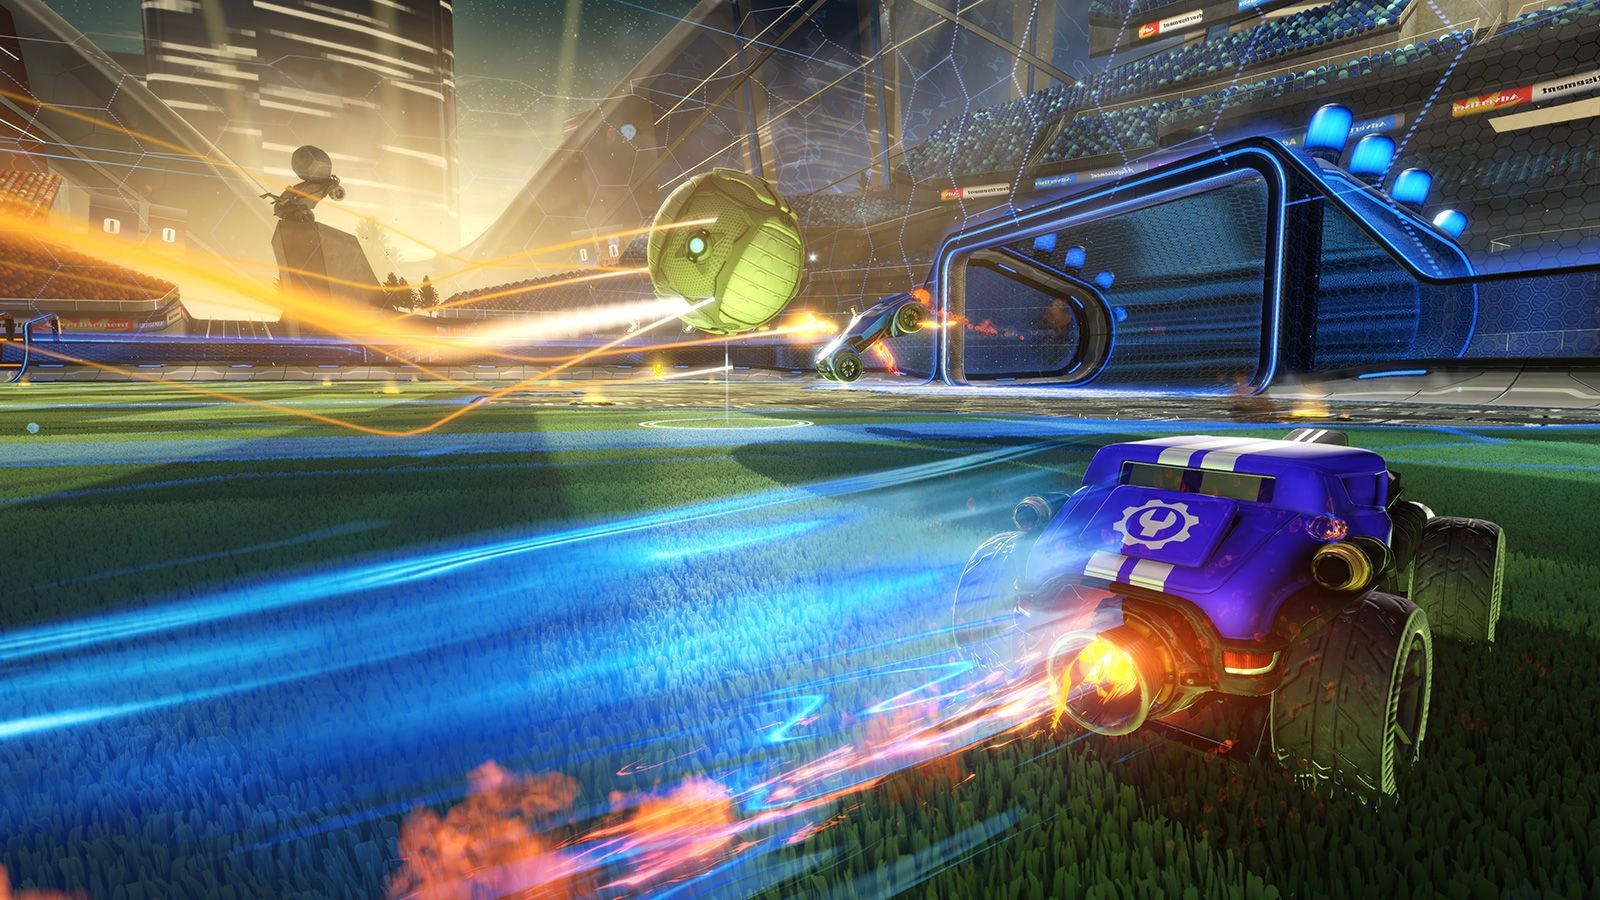 Live Life in the Fast Lane with Rocket League Wallpaper